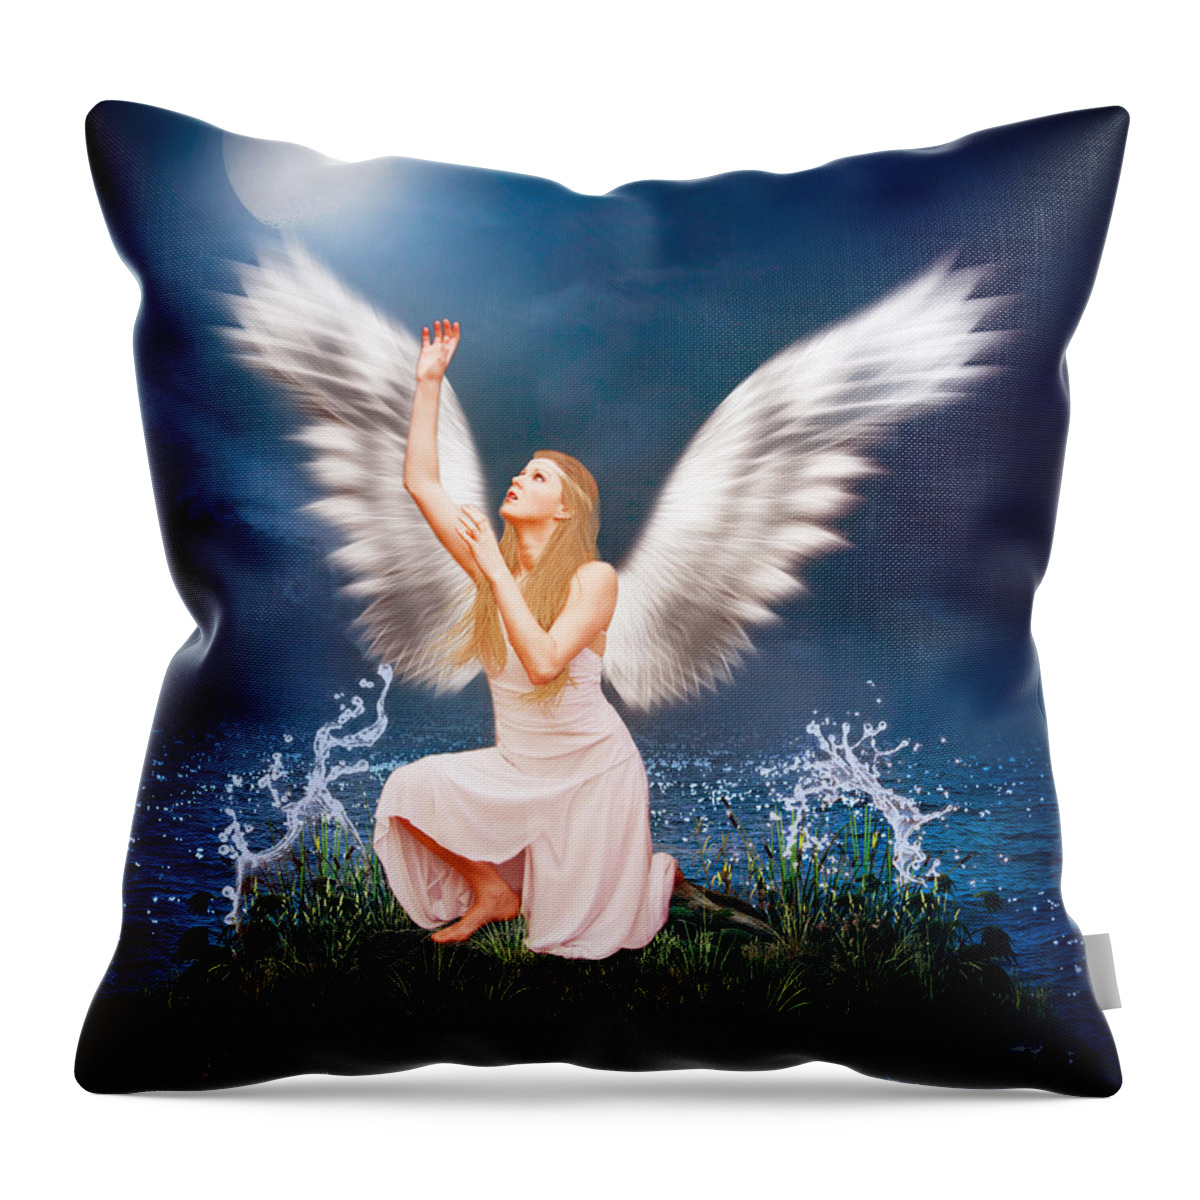 Angel.angels Throw Pillow featuring the photograph The Messenger by Ester McGuire